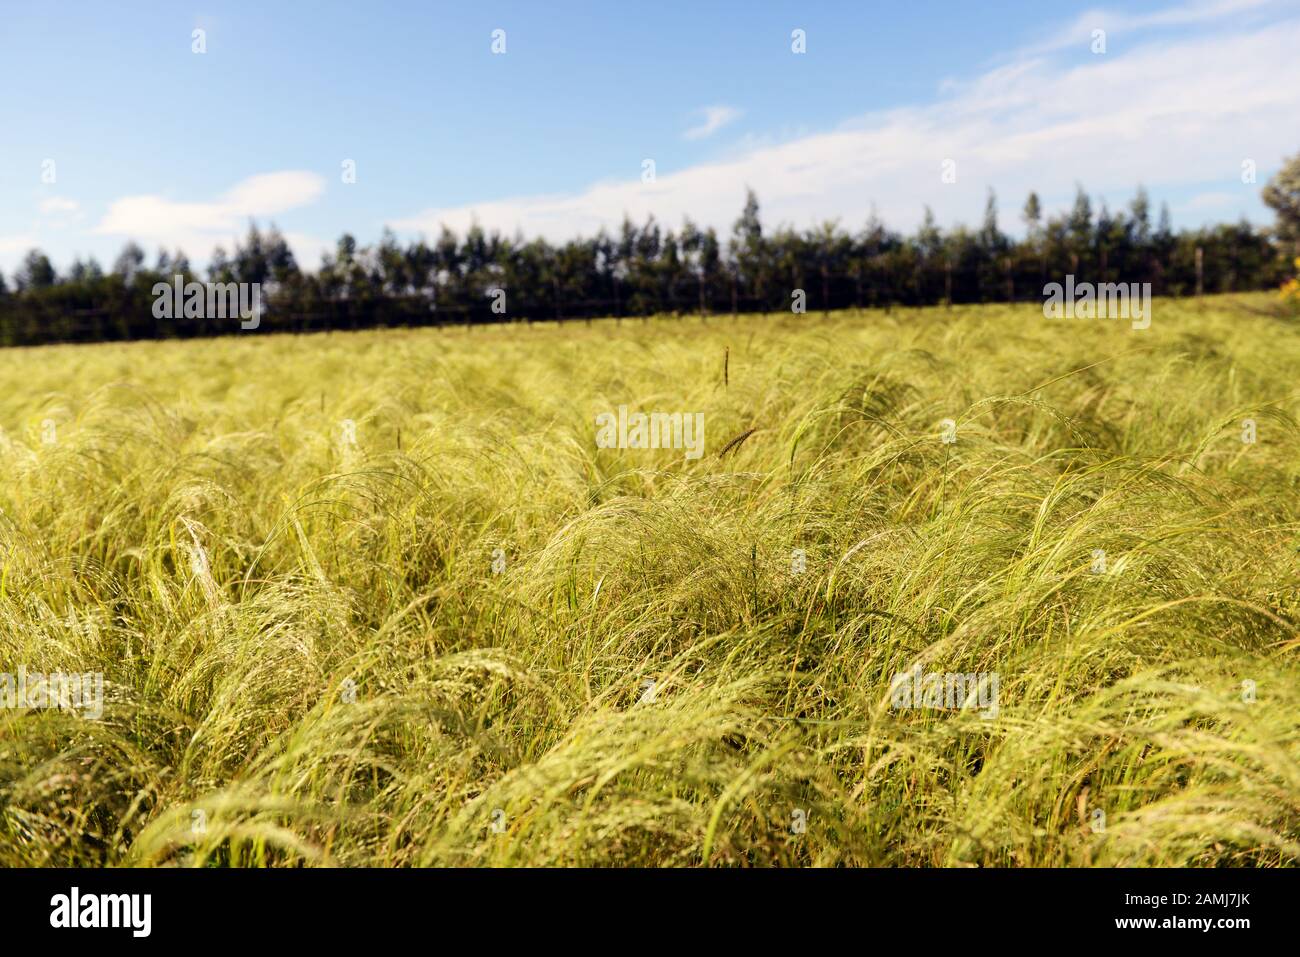 Teff crop in Ethiopia. Teff is used for making Injera- the staple diet in Ethiopia and Eritrea. Stock Photo